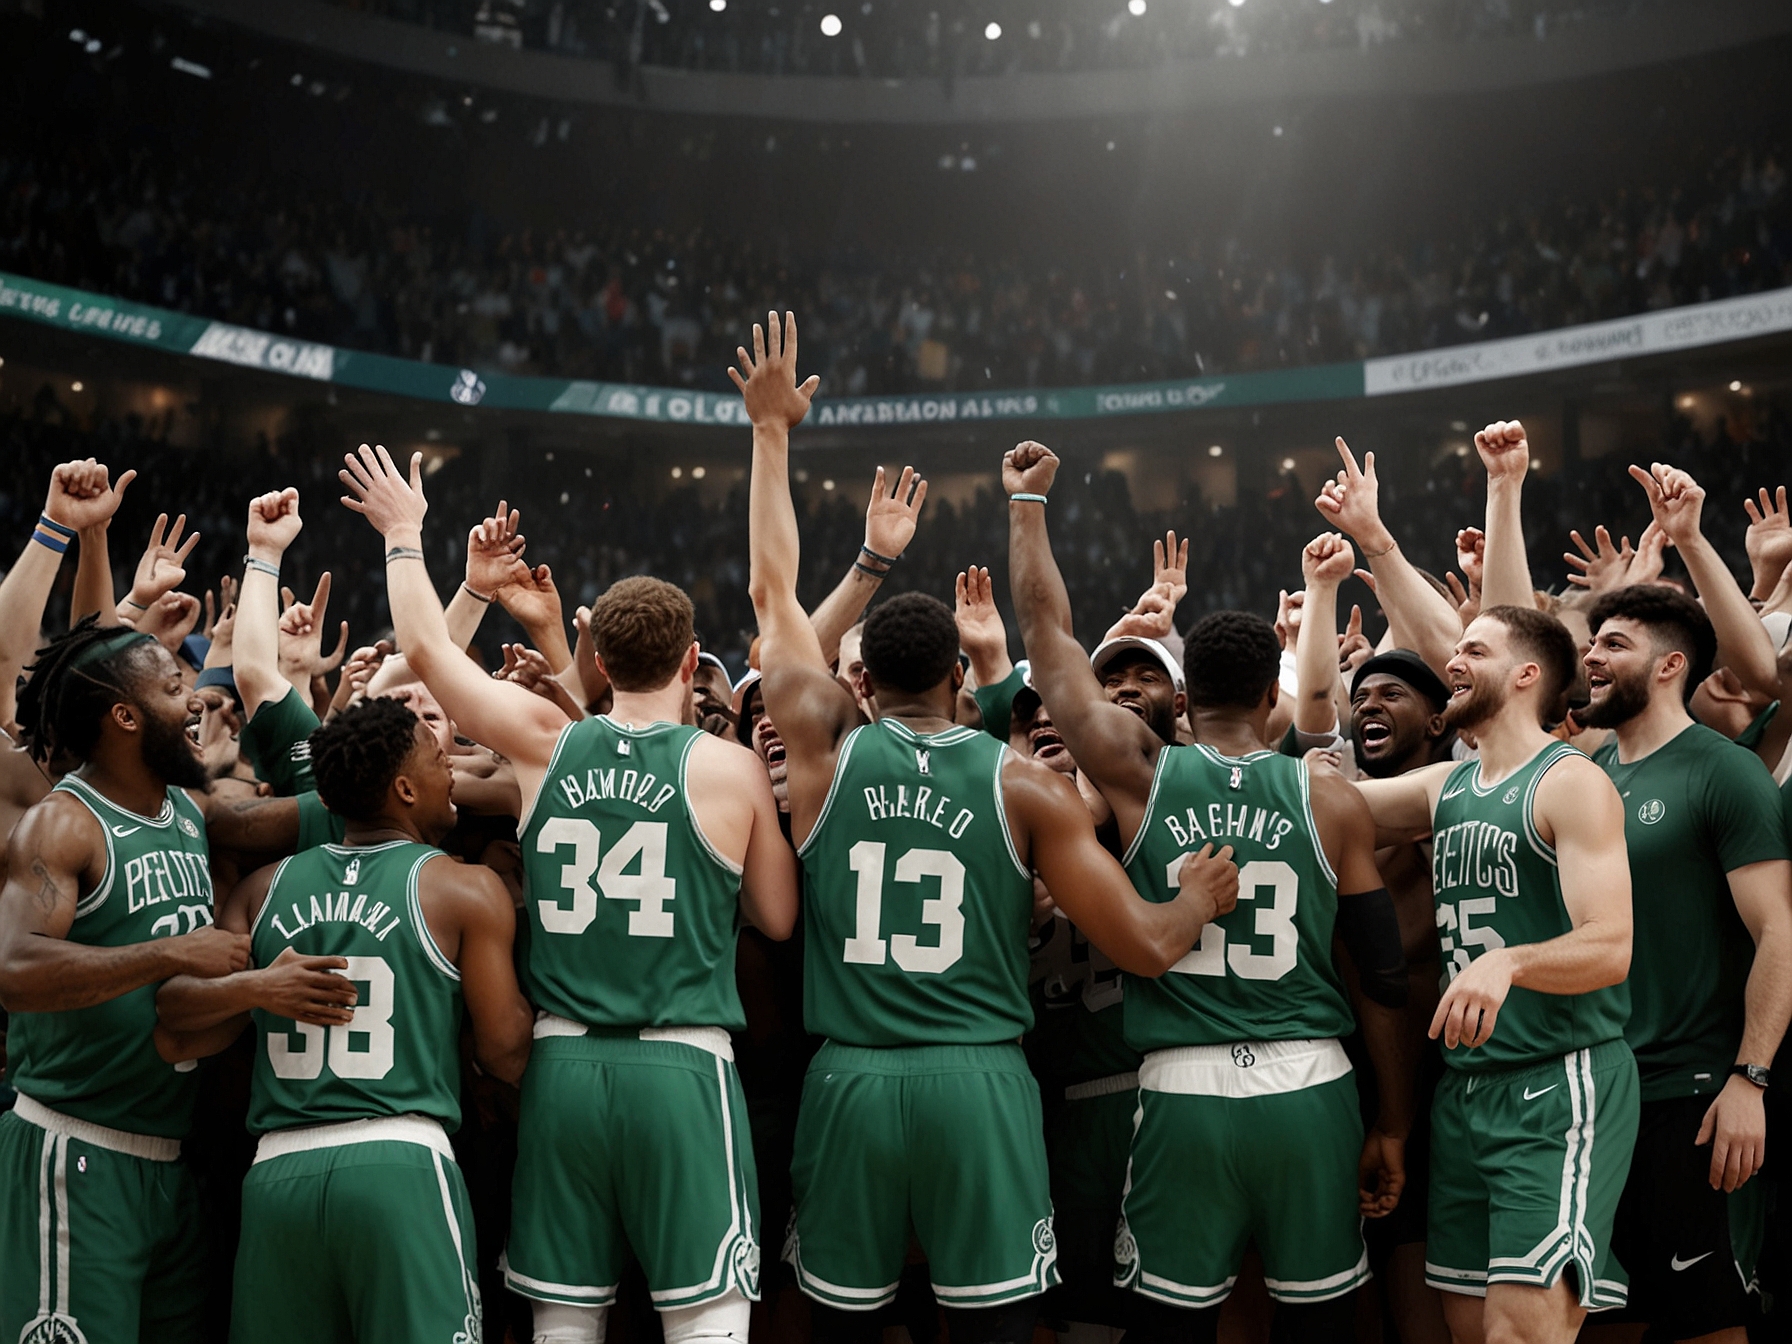 Celtics players and fans celebrate on the court as the final buzzer sounds, marking their triumphant 106-88 victory over the Dallas Mavericks and clinching the 2023 NBA championship.